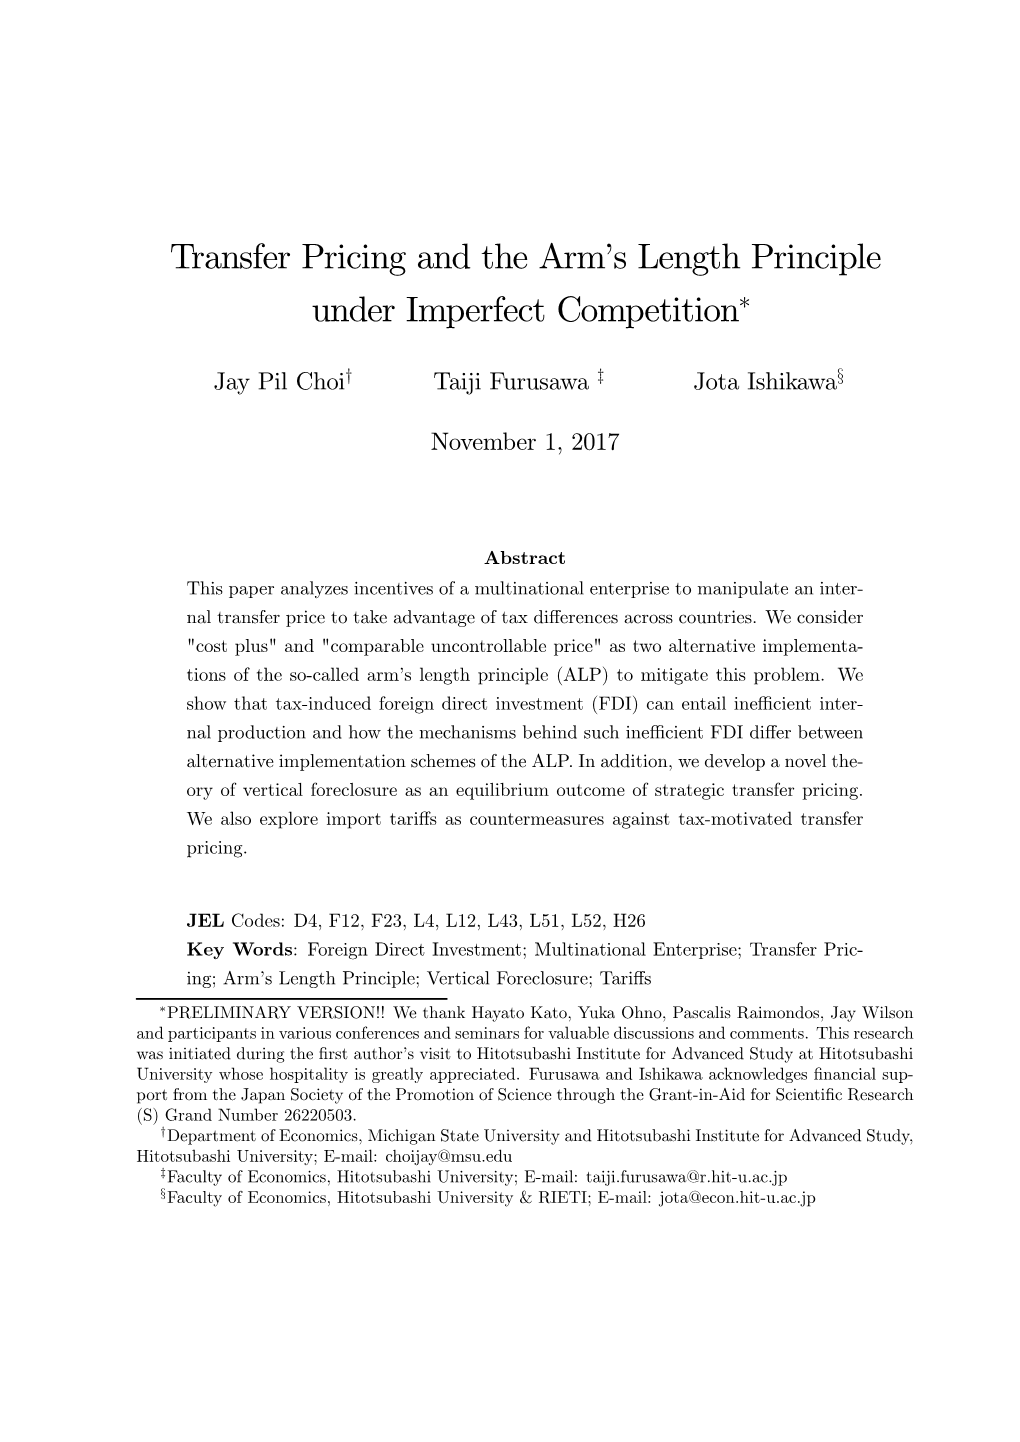 Transfer Pricing and the Arm's Length Principle Under Imperfect Competition